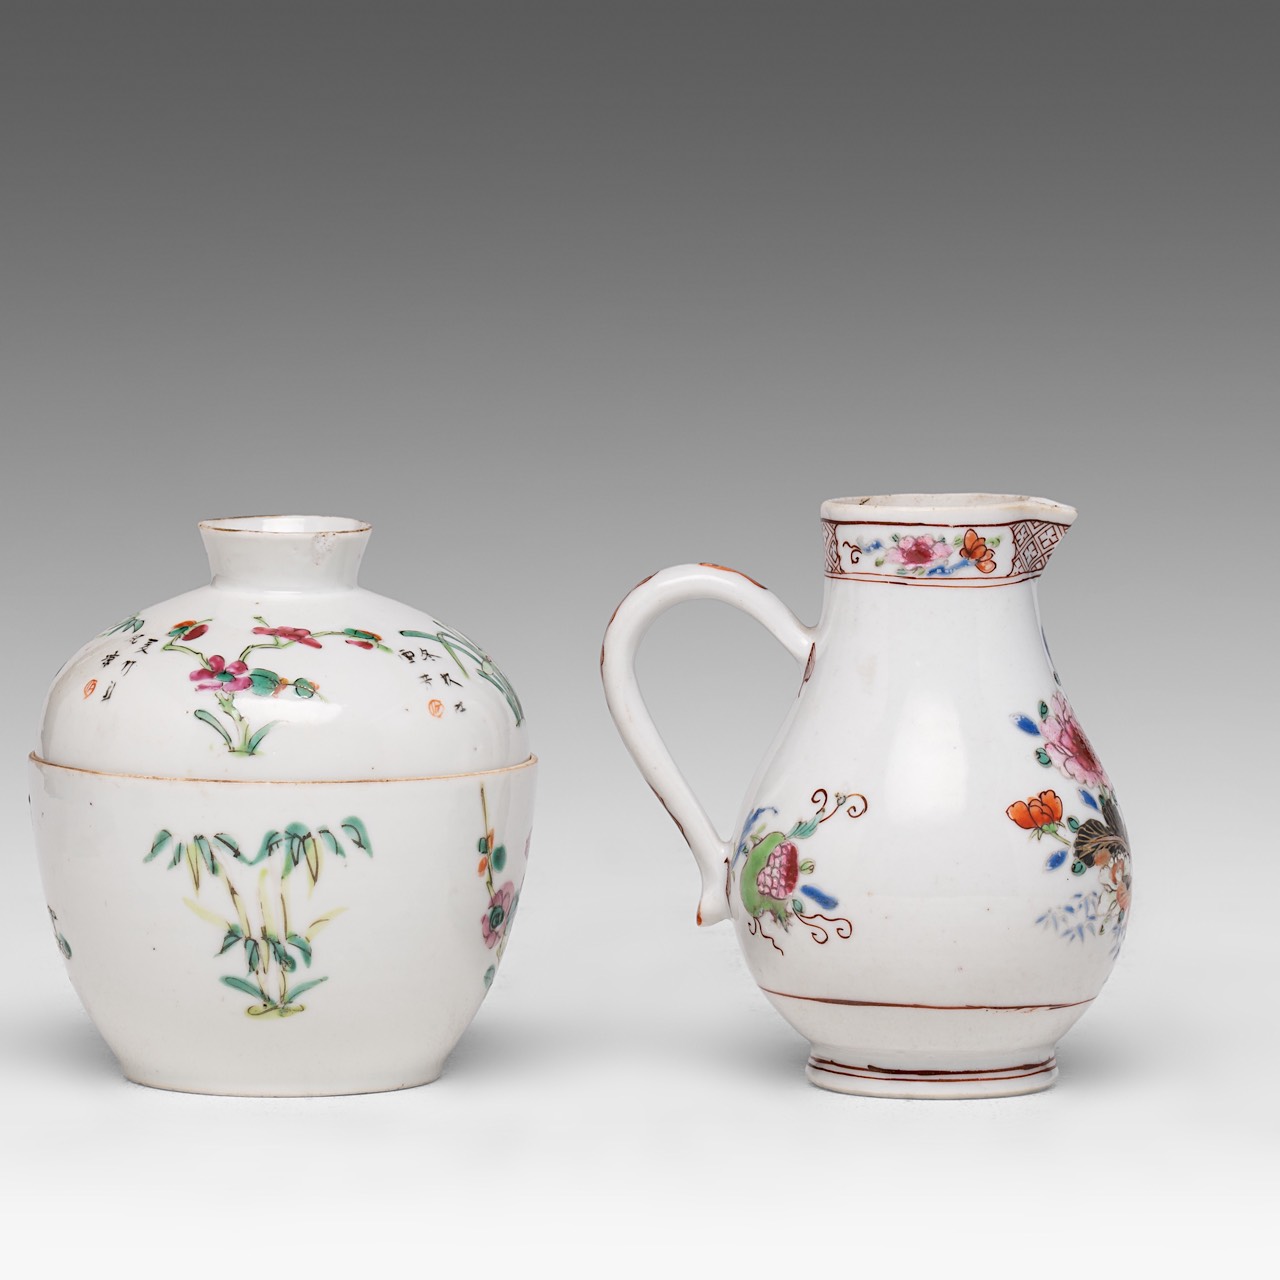 A collection of four Chinese scholar's objects, incl. a brush pot with inscriptions, late 18thC - ad - Image 9 of 29